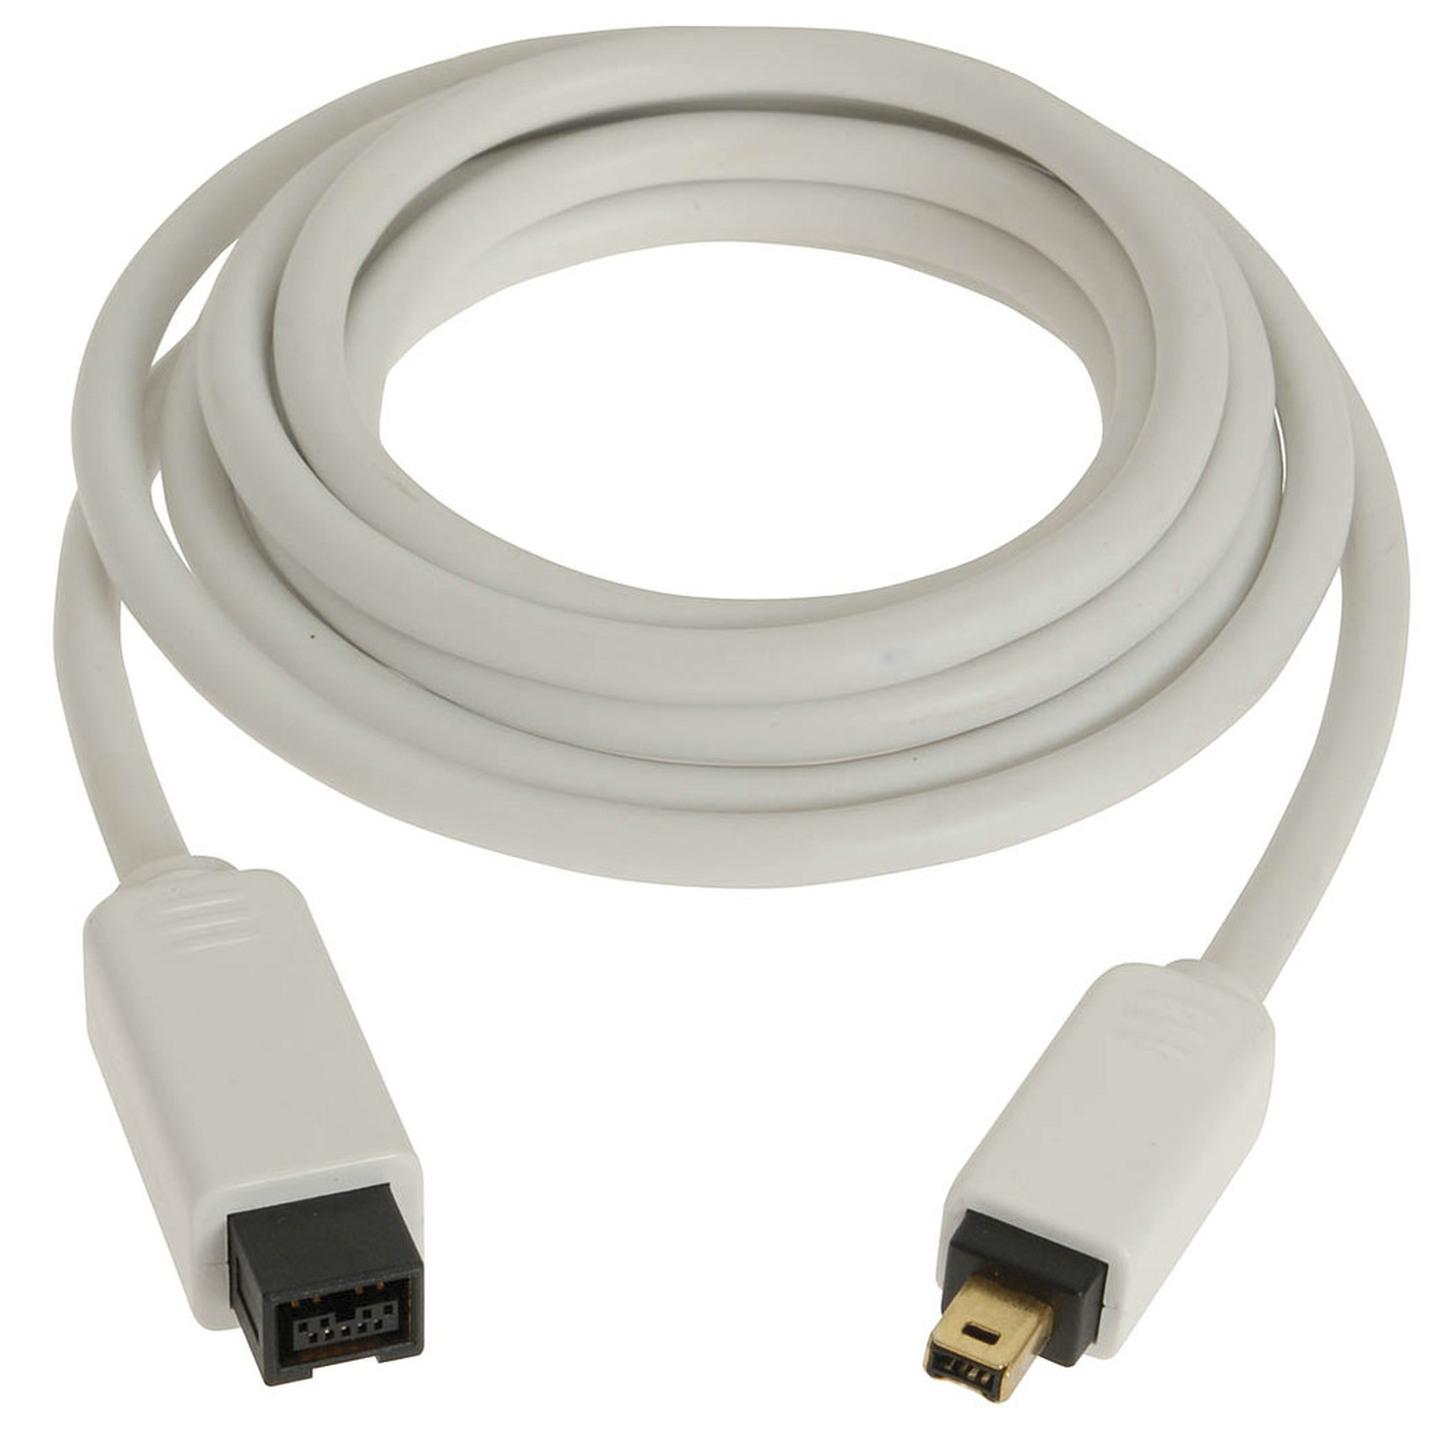 IEEE1394 B 9-pin to IEEE1394 A 4-pin Cable - 1.8m